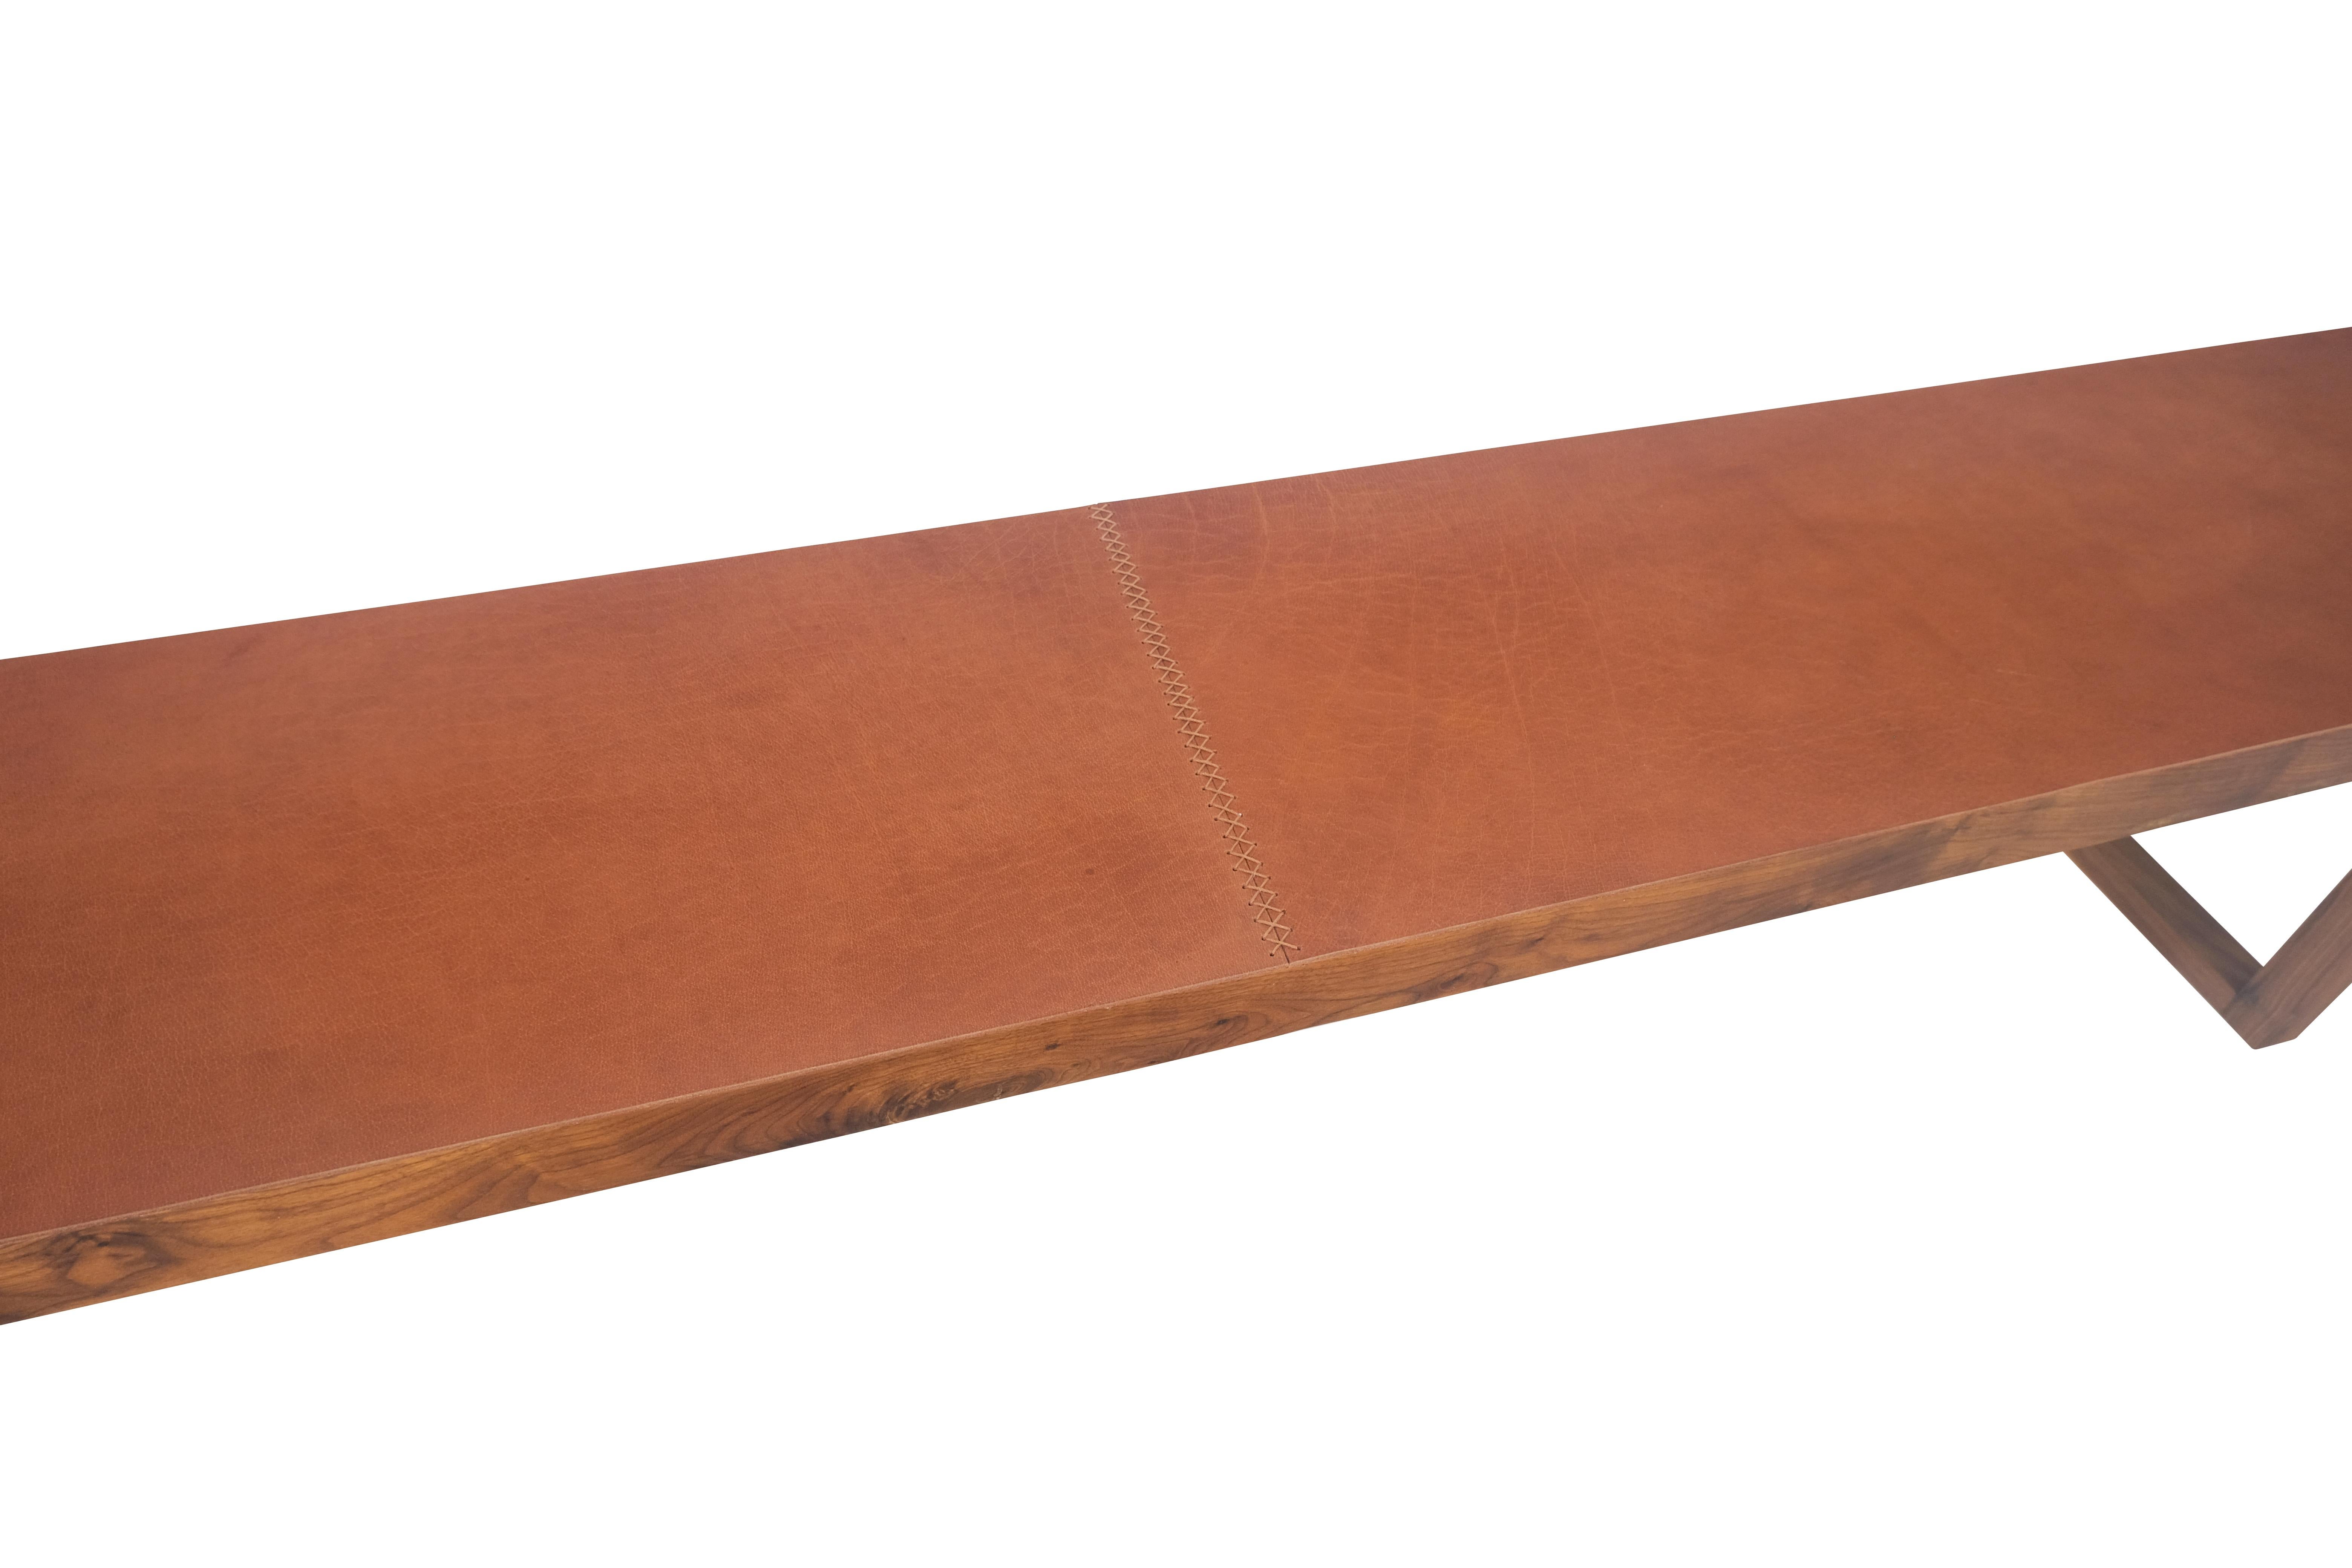 Unknown Slim Profile Solid Walnut Frame Integrated leather Cushion 7.5' Long Bench 